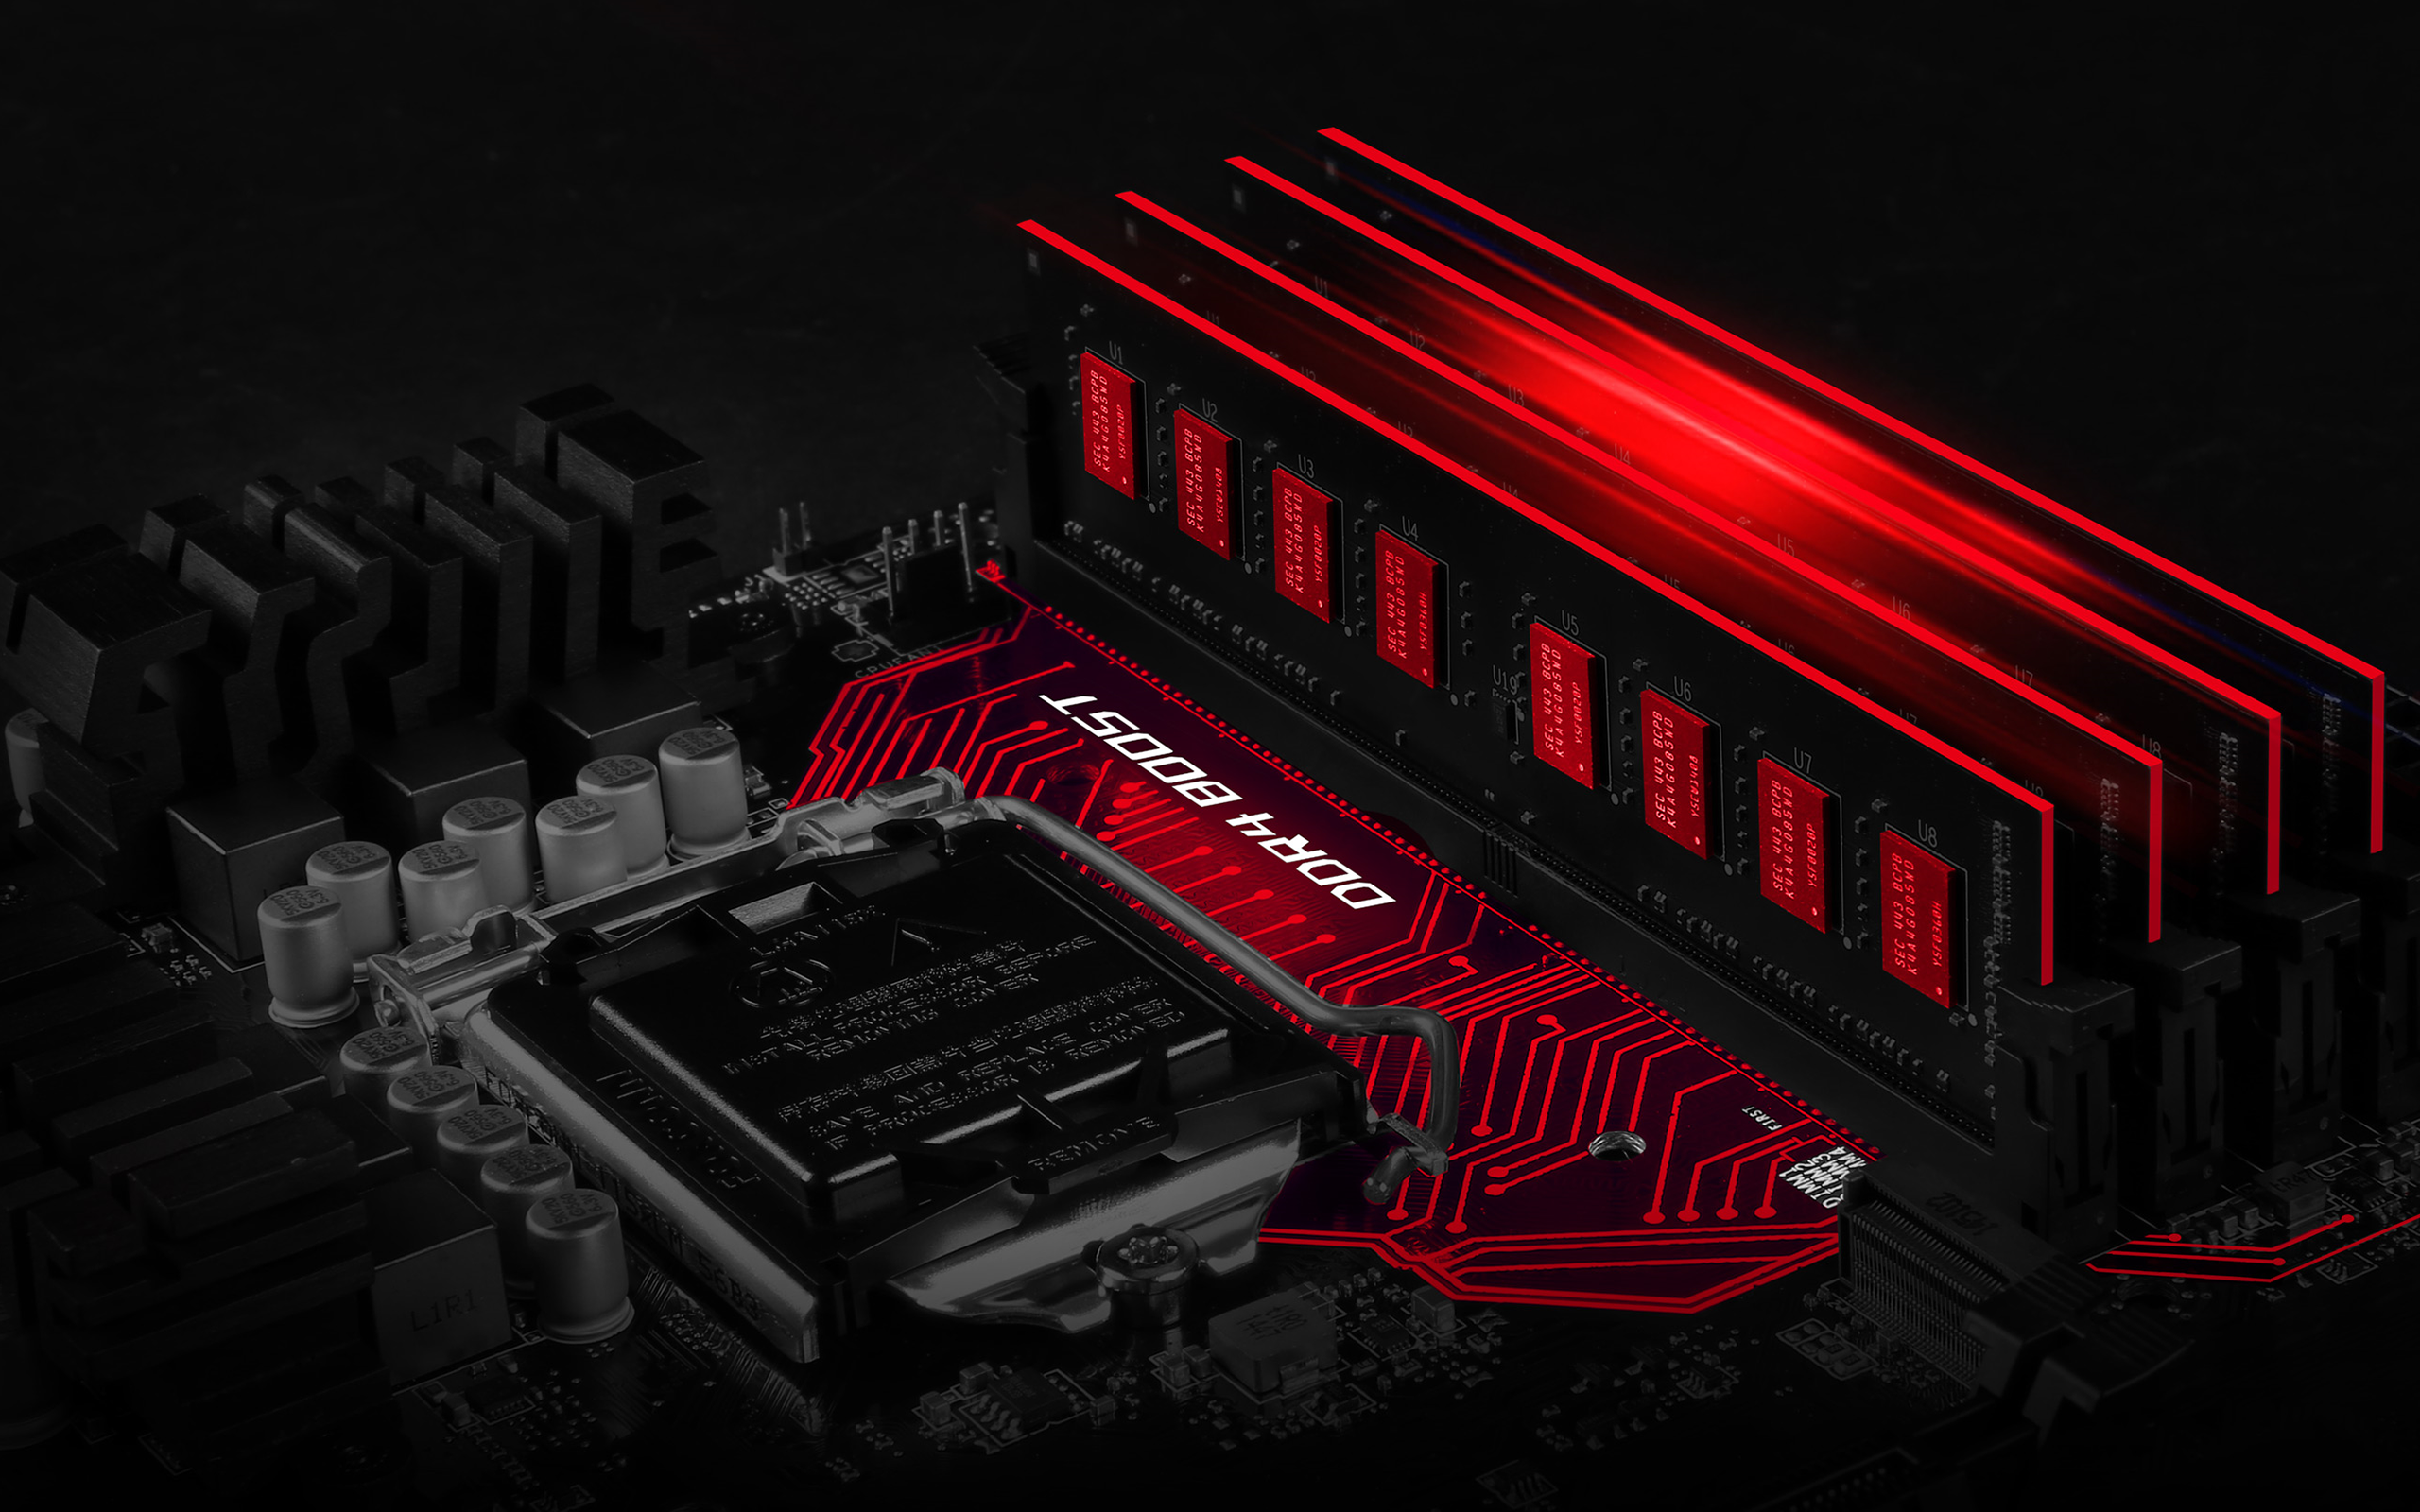 Wallpaper, black, illustration, red, technology, MSI, PC gaming, motherboards, Random Access Memory, light, darkness, computer wallpaper, personal computer hardware, font 2560x1600